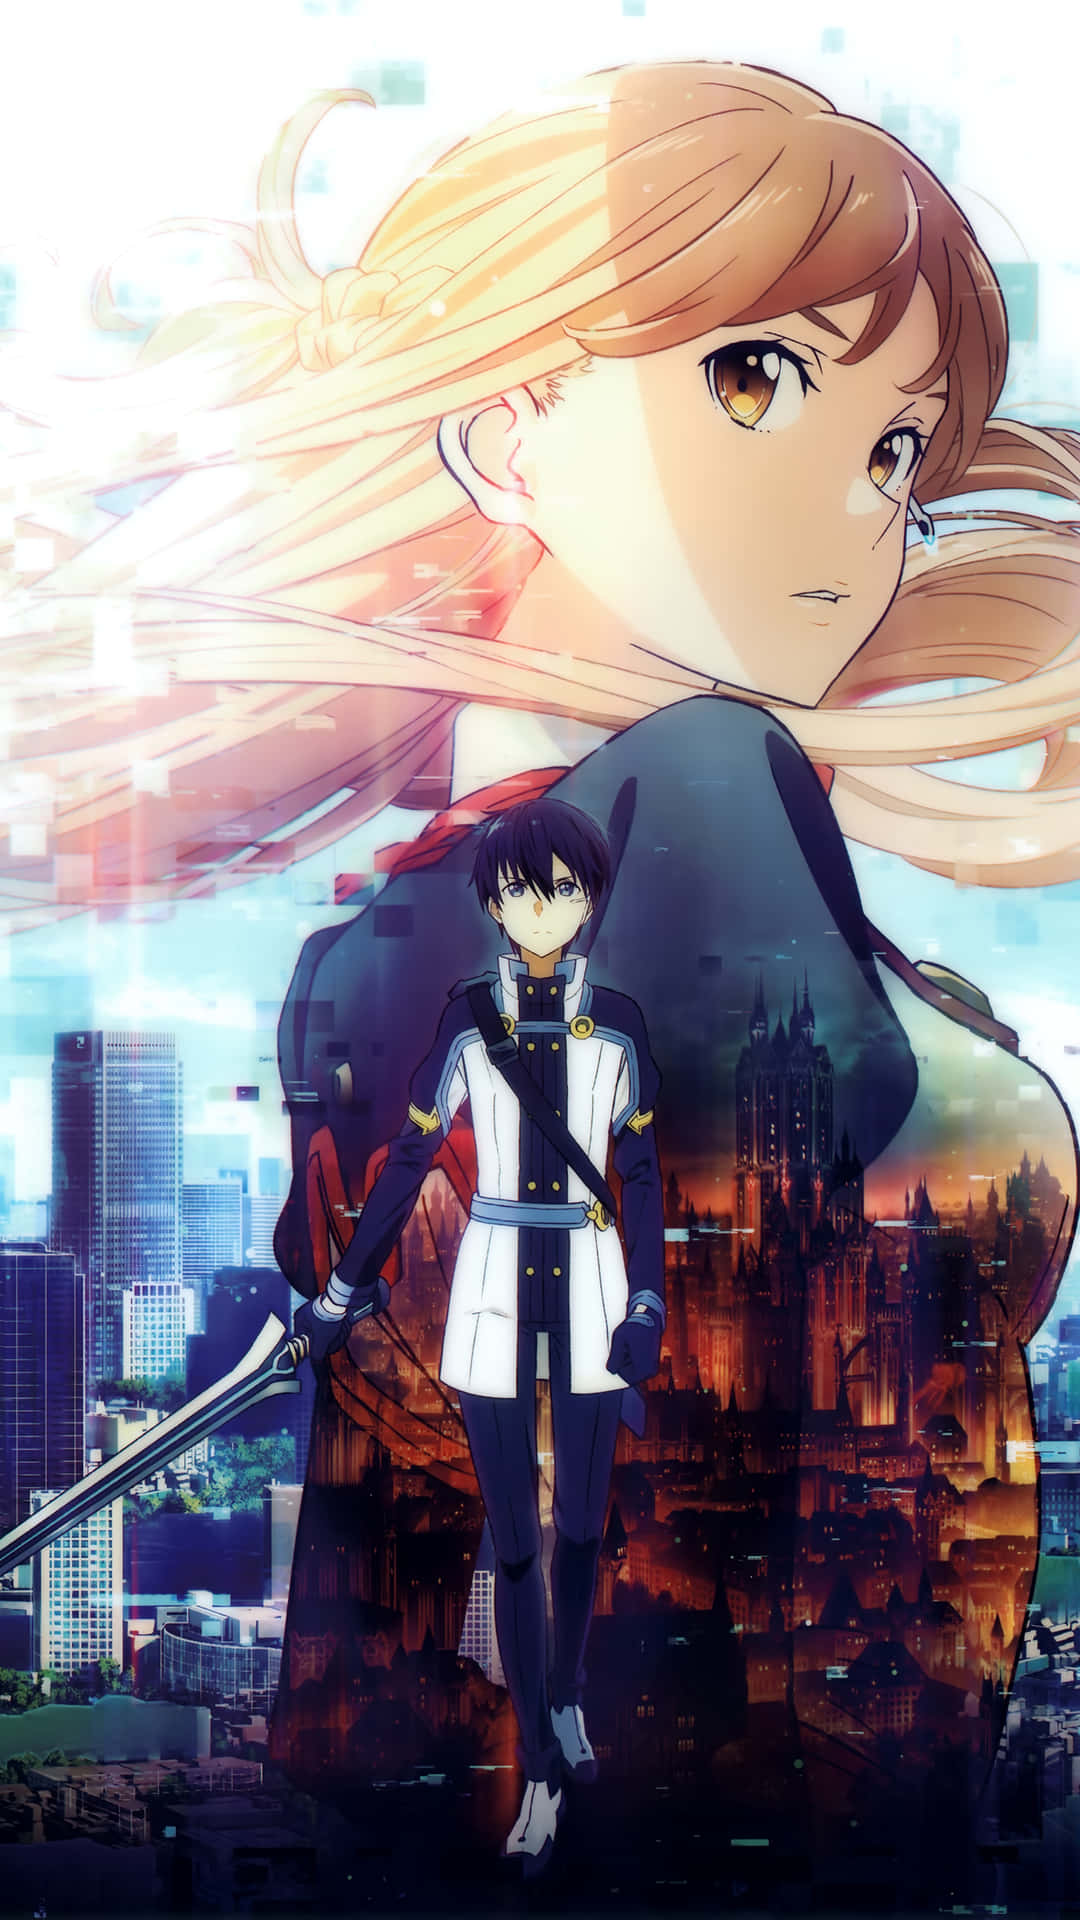 Live Life Unstoppable with Sao Phone Wallpaper